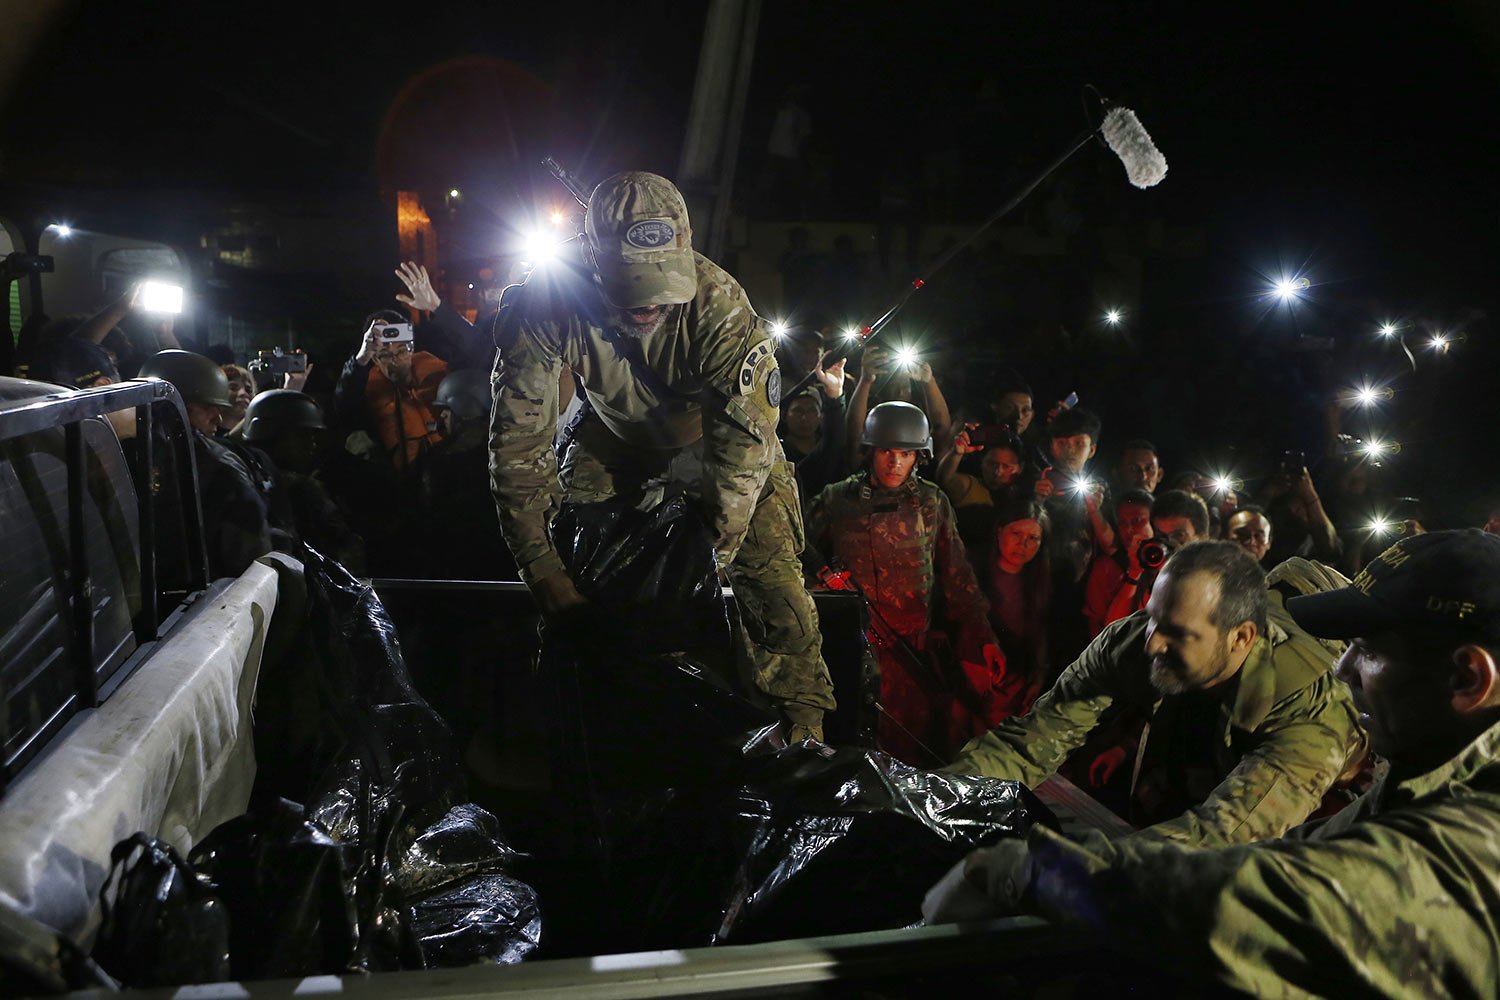  Federal police officers load body bags with recovered human remains onto a police vehicle after being found during a search for Indigenous expert Bruno Pereira of Brazil and freelance reporter Dom Phillips of Britain, in Atalaia do Norte, Amazonas s